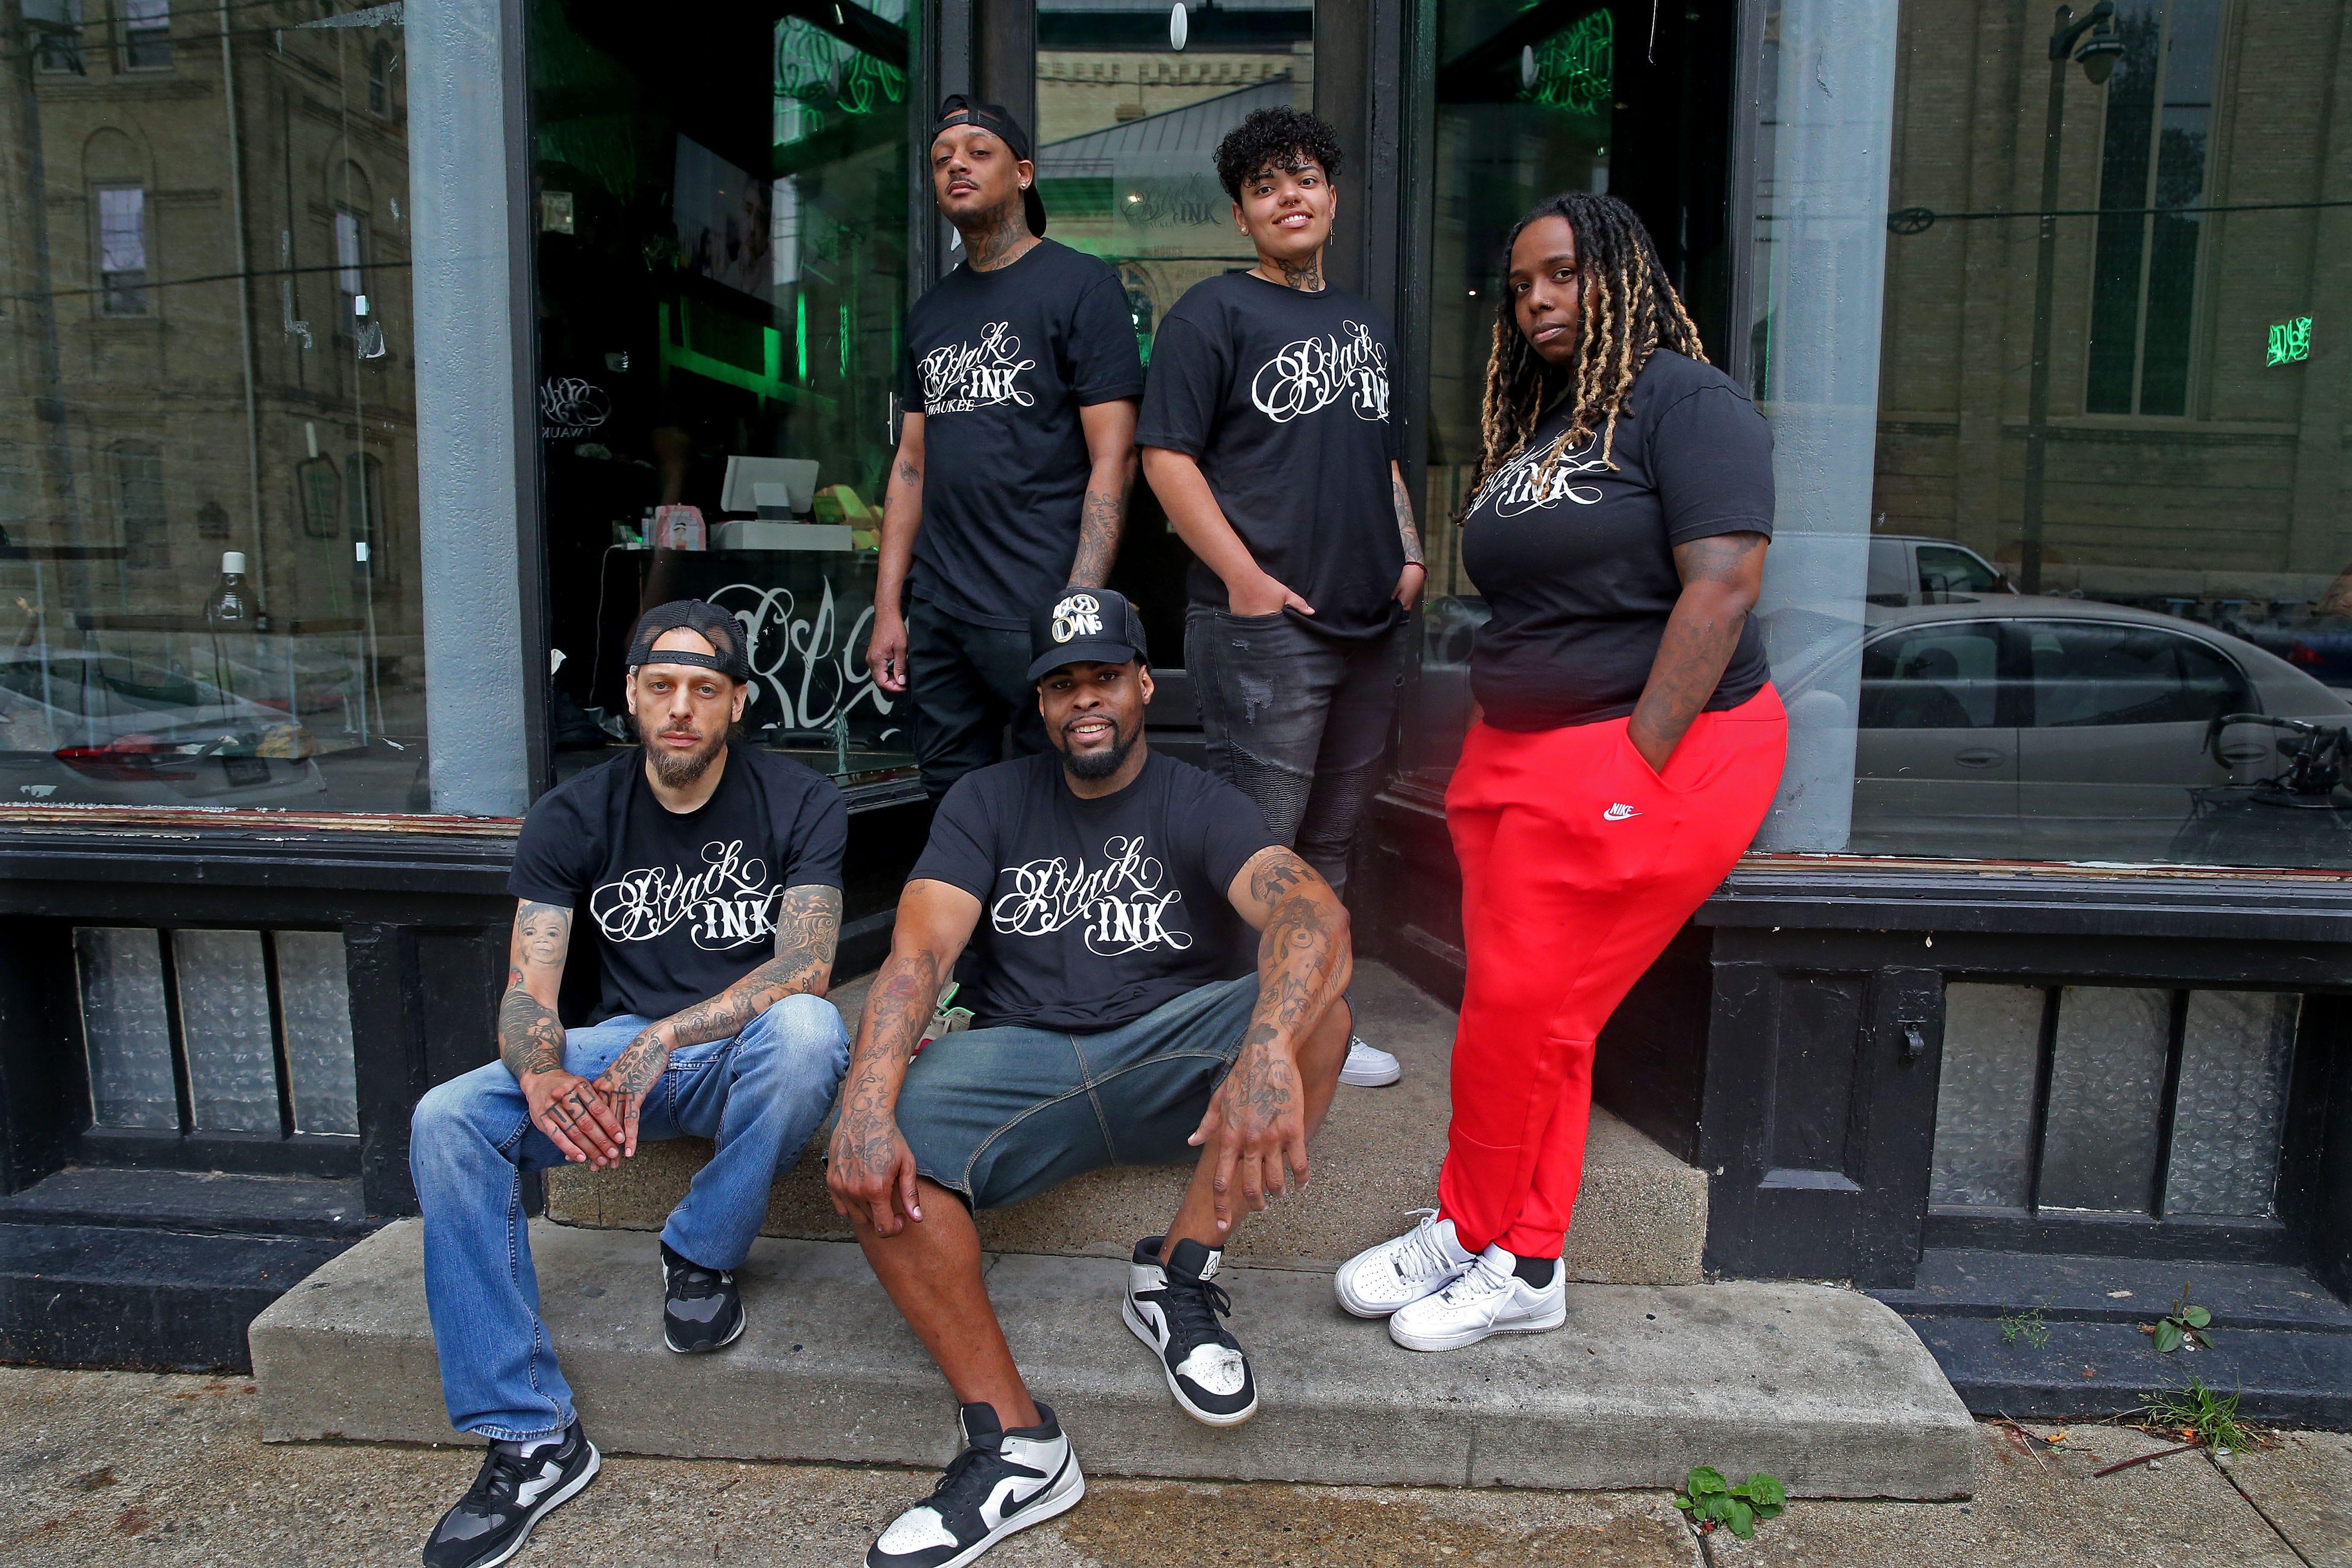 The staff of Black Ink from left seated, Kustom, Eddie Mac, standing from left, Art Lewis, Jace, Tiara McGee on E. Brady Street in Milwaukee. "Black Ink" tattoo shops became famous from the VH1 program "Black Ink crew.